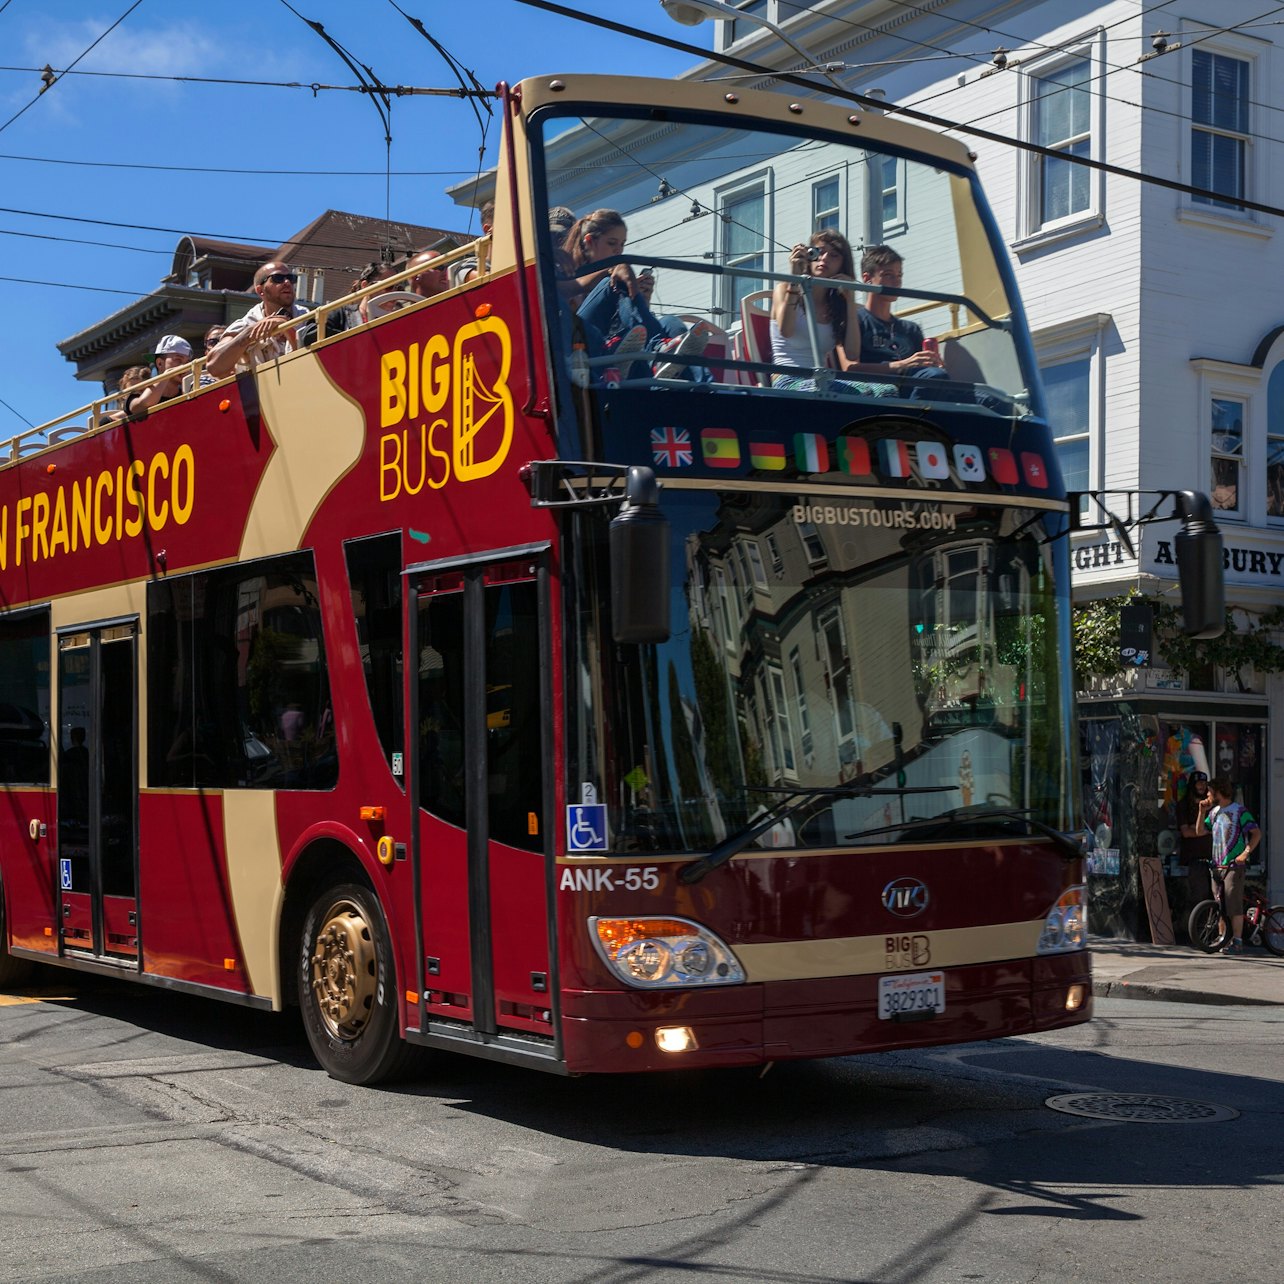 Big Bus San Francisco: Hop-on Hop-off Tour - Accommodations in San Francisco